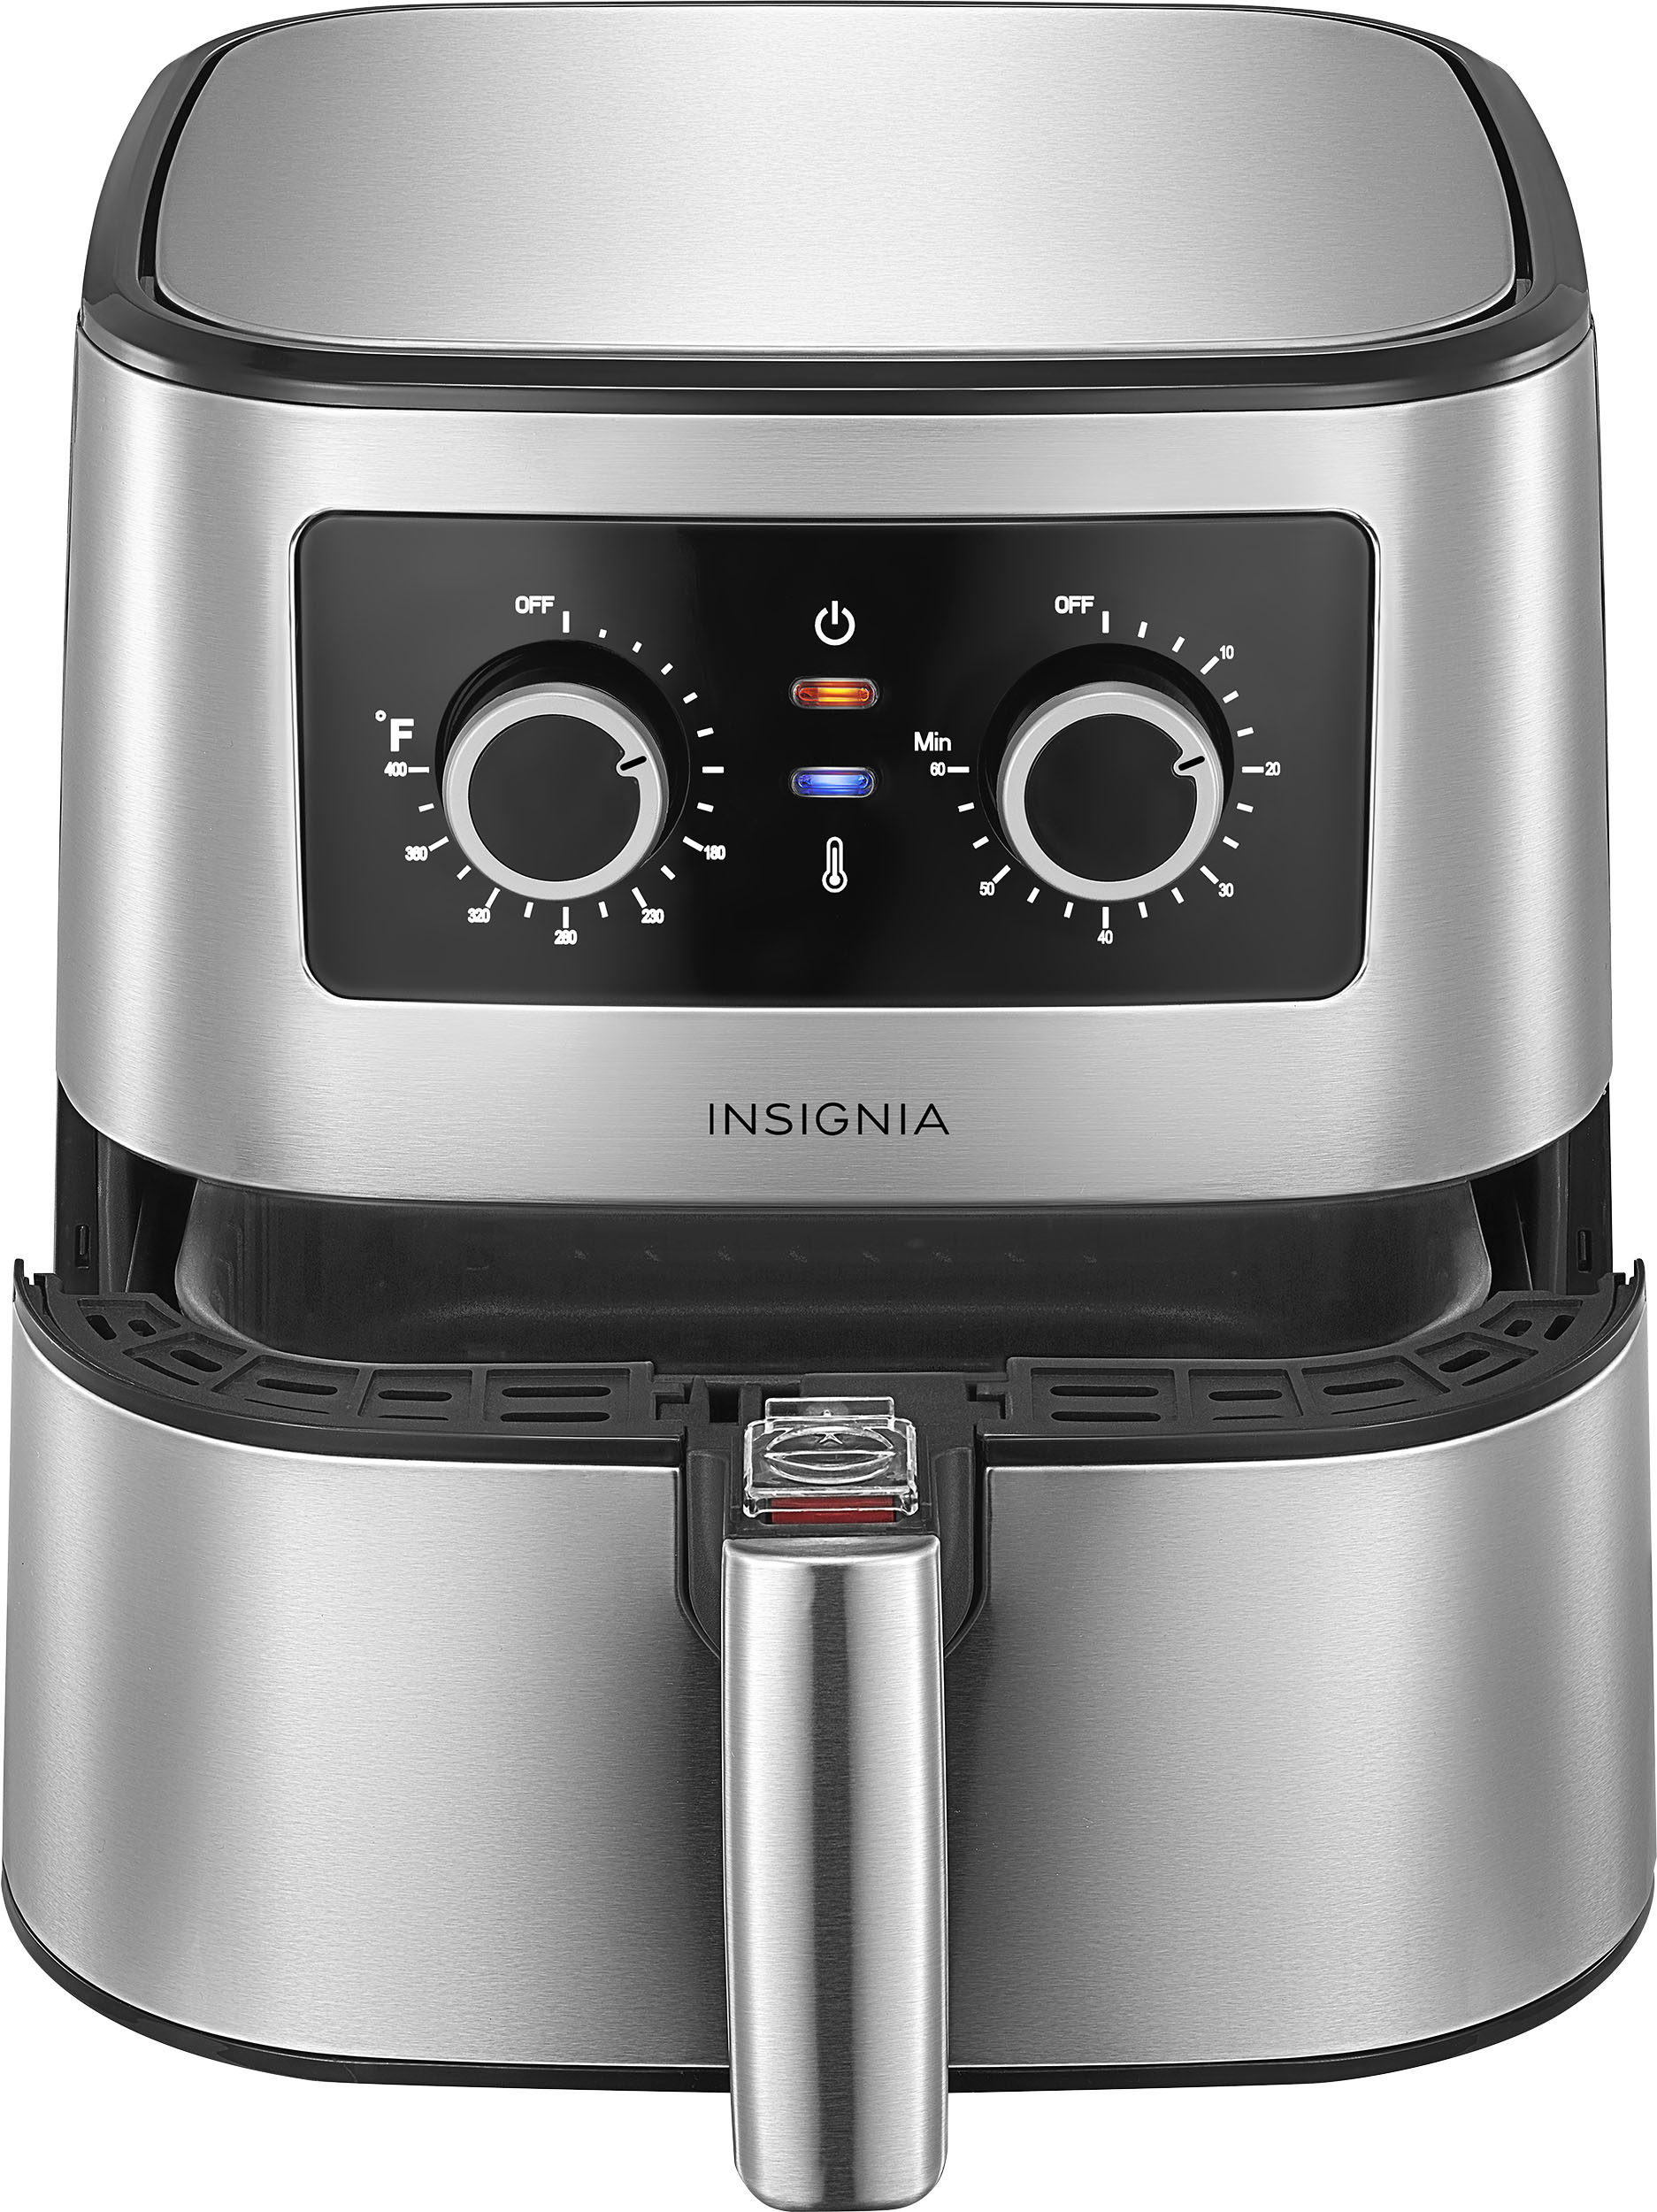 Insignia- 5 Qt. Analog Air Fryer - Stainless Steel 600603283031